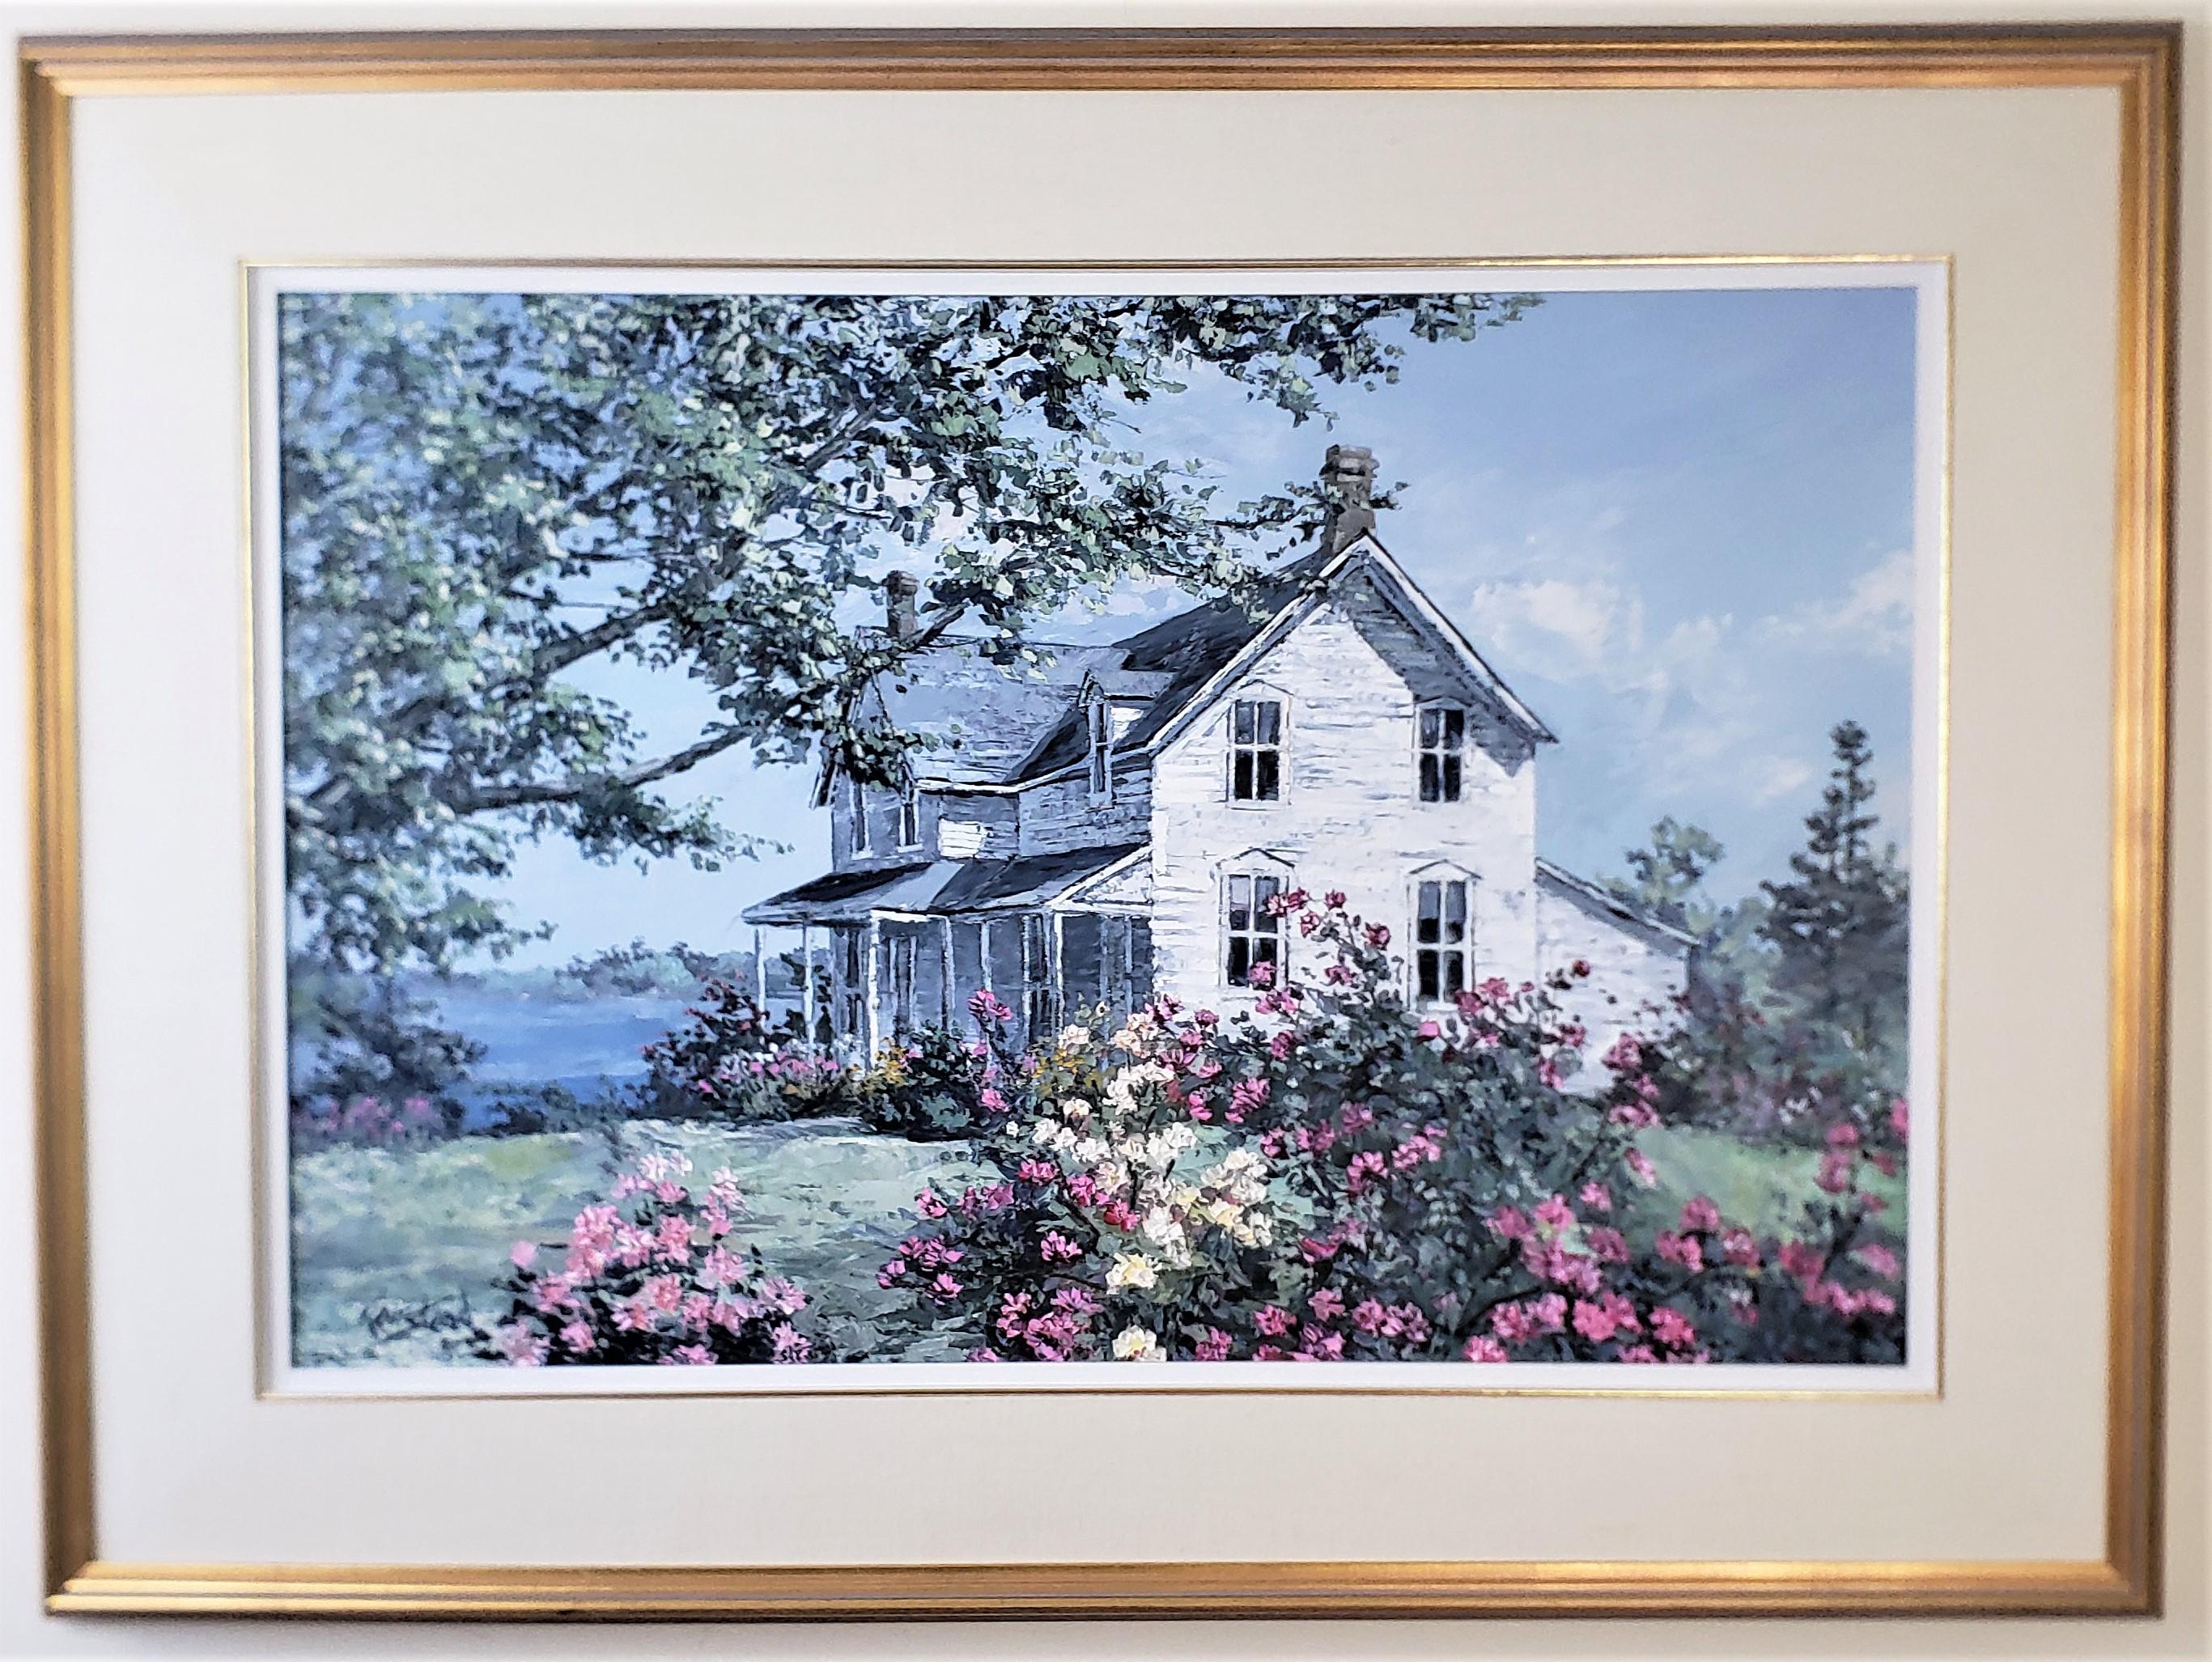 This original painting was done by the well known James L. Keirstead of Canada in 1988 in his signature realistic style. The painting is titled: The Summers Place and depicts a rustic country clapboard homestead in Chaffeys Locks. The painting is